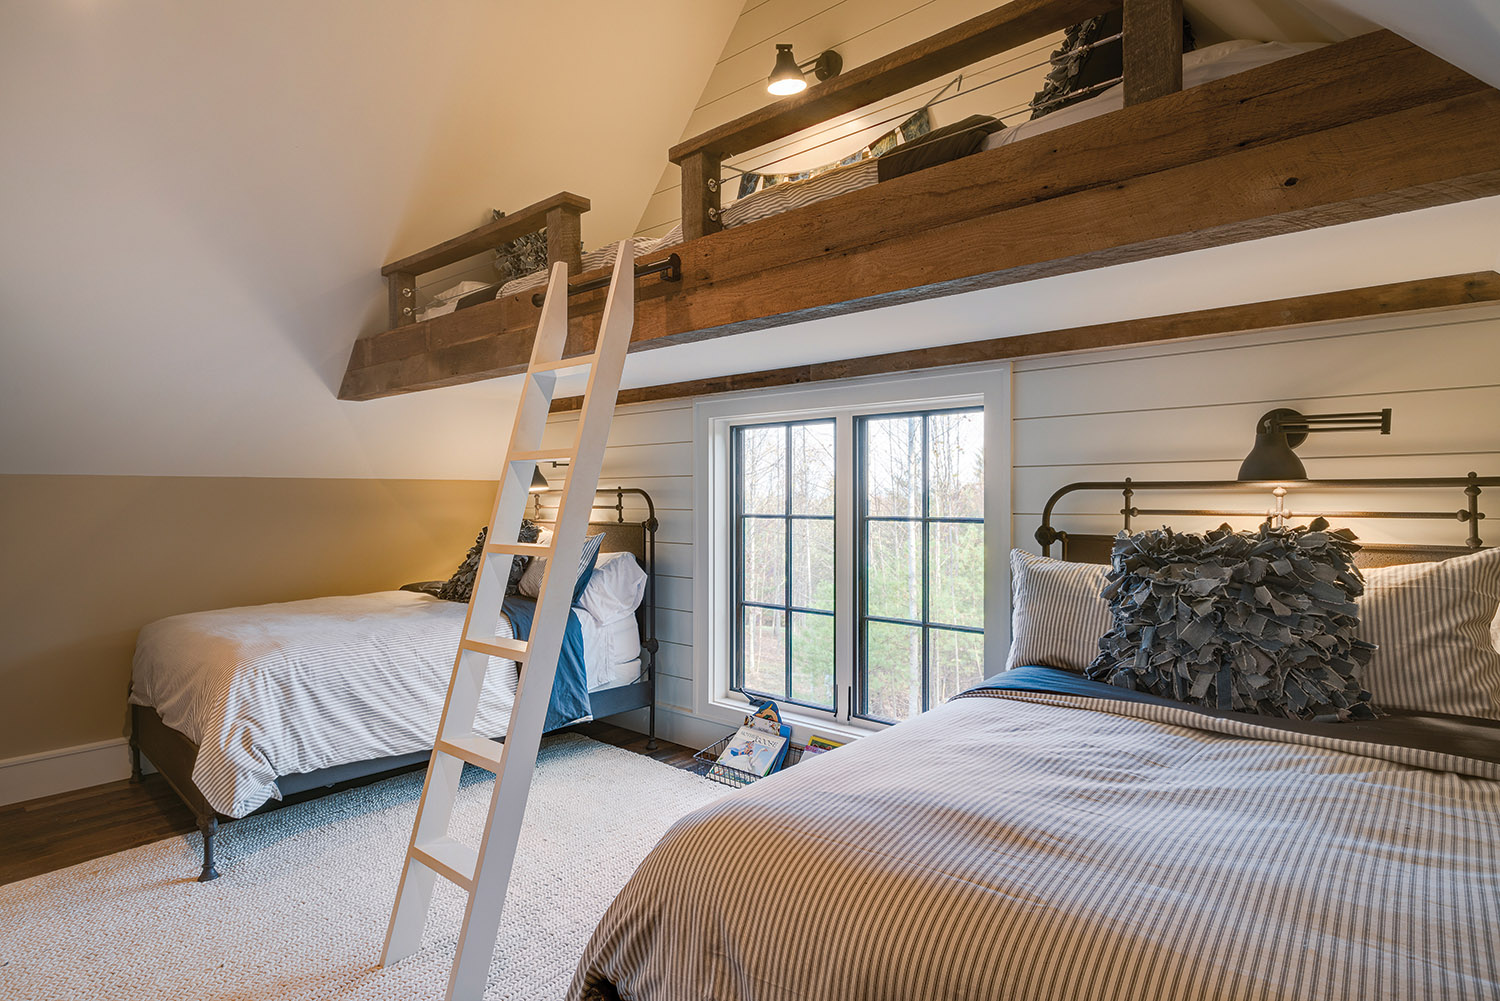 In the bedroom, stylish steel-frame beds are from Restoration Hardware. Photo by Kevin Meechan